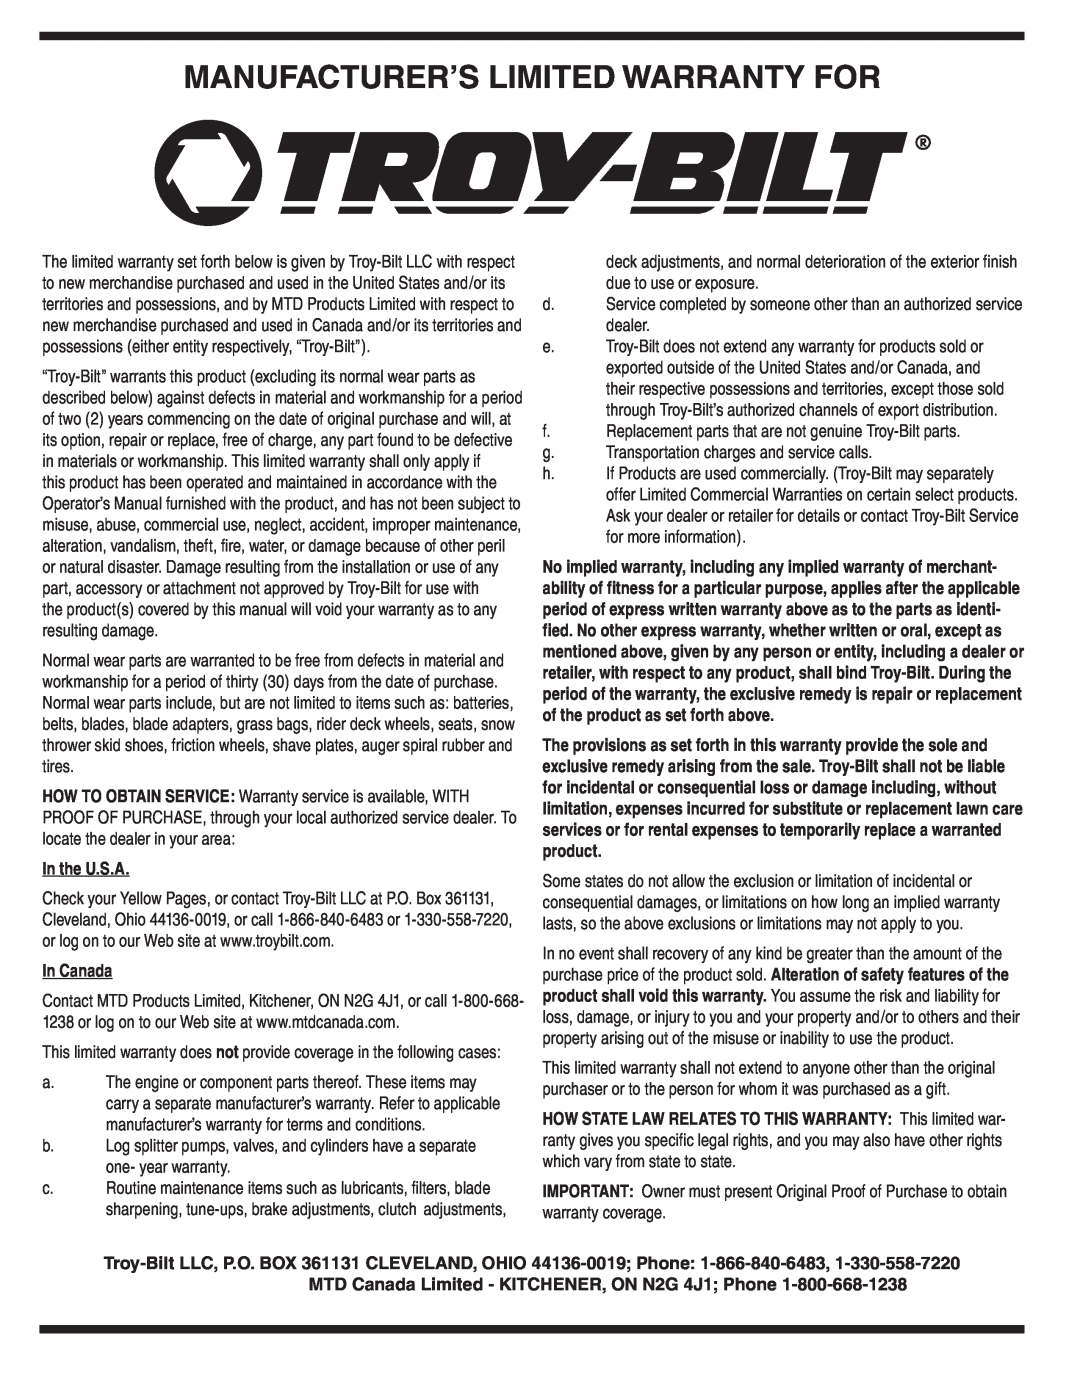 Troy-Bilt 570 manual Manufacturer’S Limited Warranty For, In the U.S.A, In Canada 